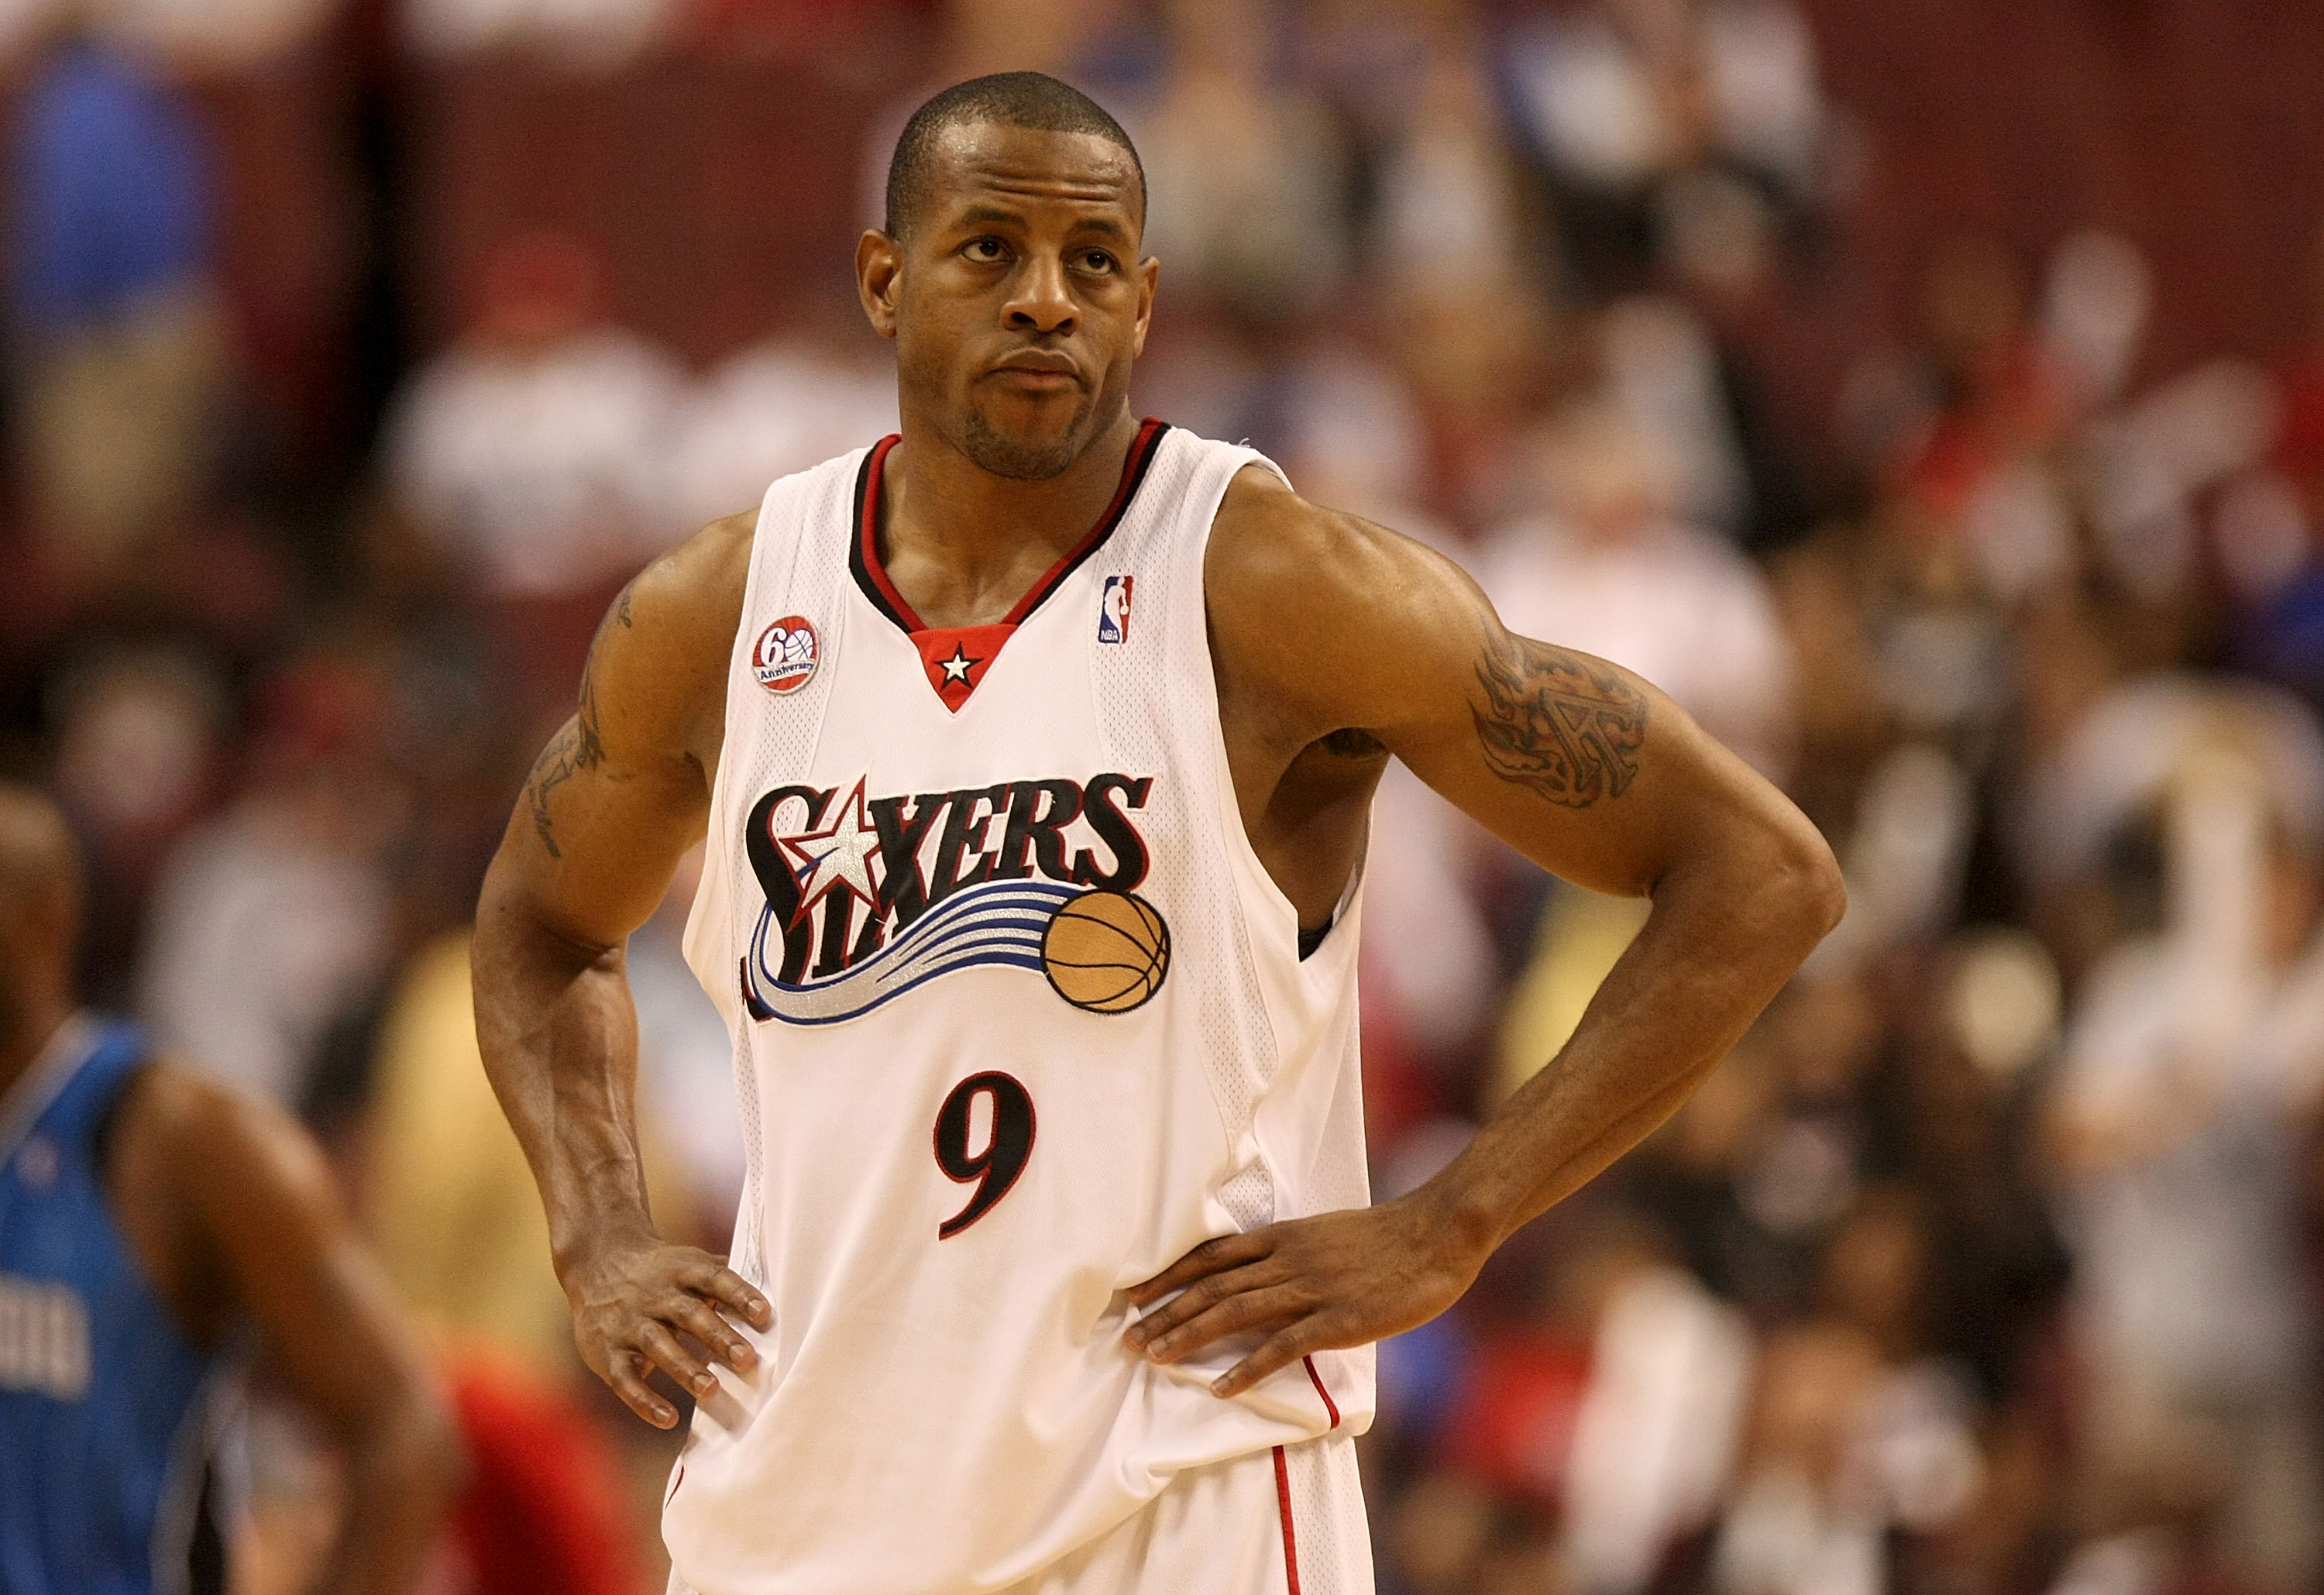 2004 NBA re-draft: 76ers grab Tony Allen at 9 with Andre Iguodala gone